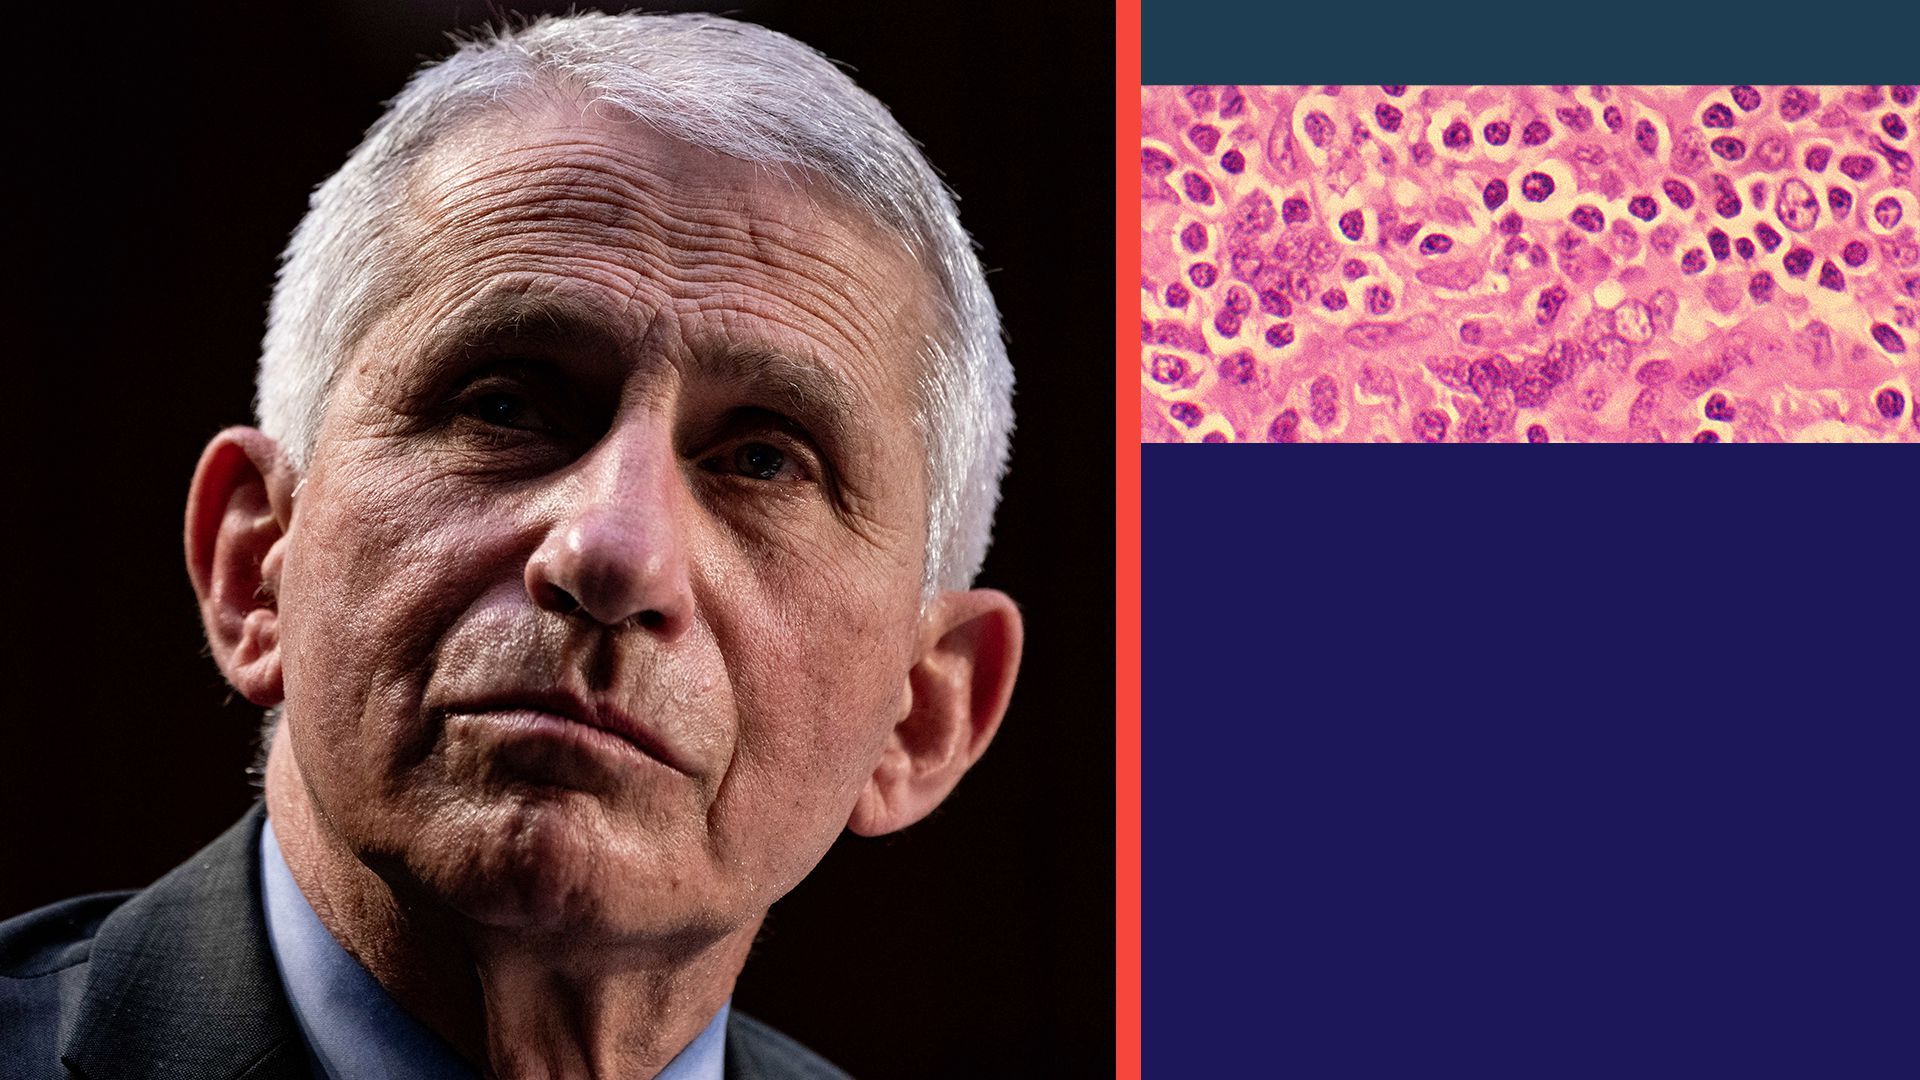 Illustration collage of Dr. Anthony Fauci and HIV cells